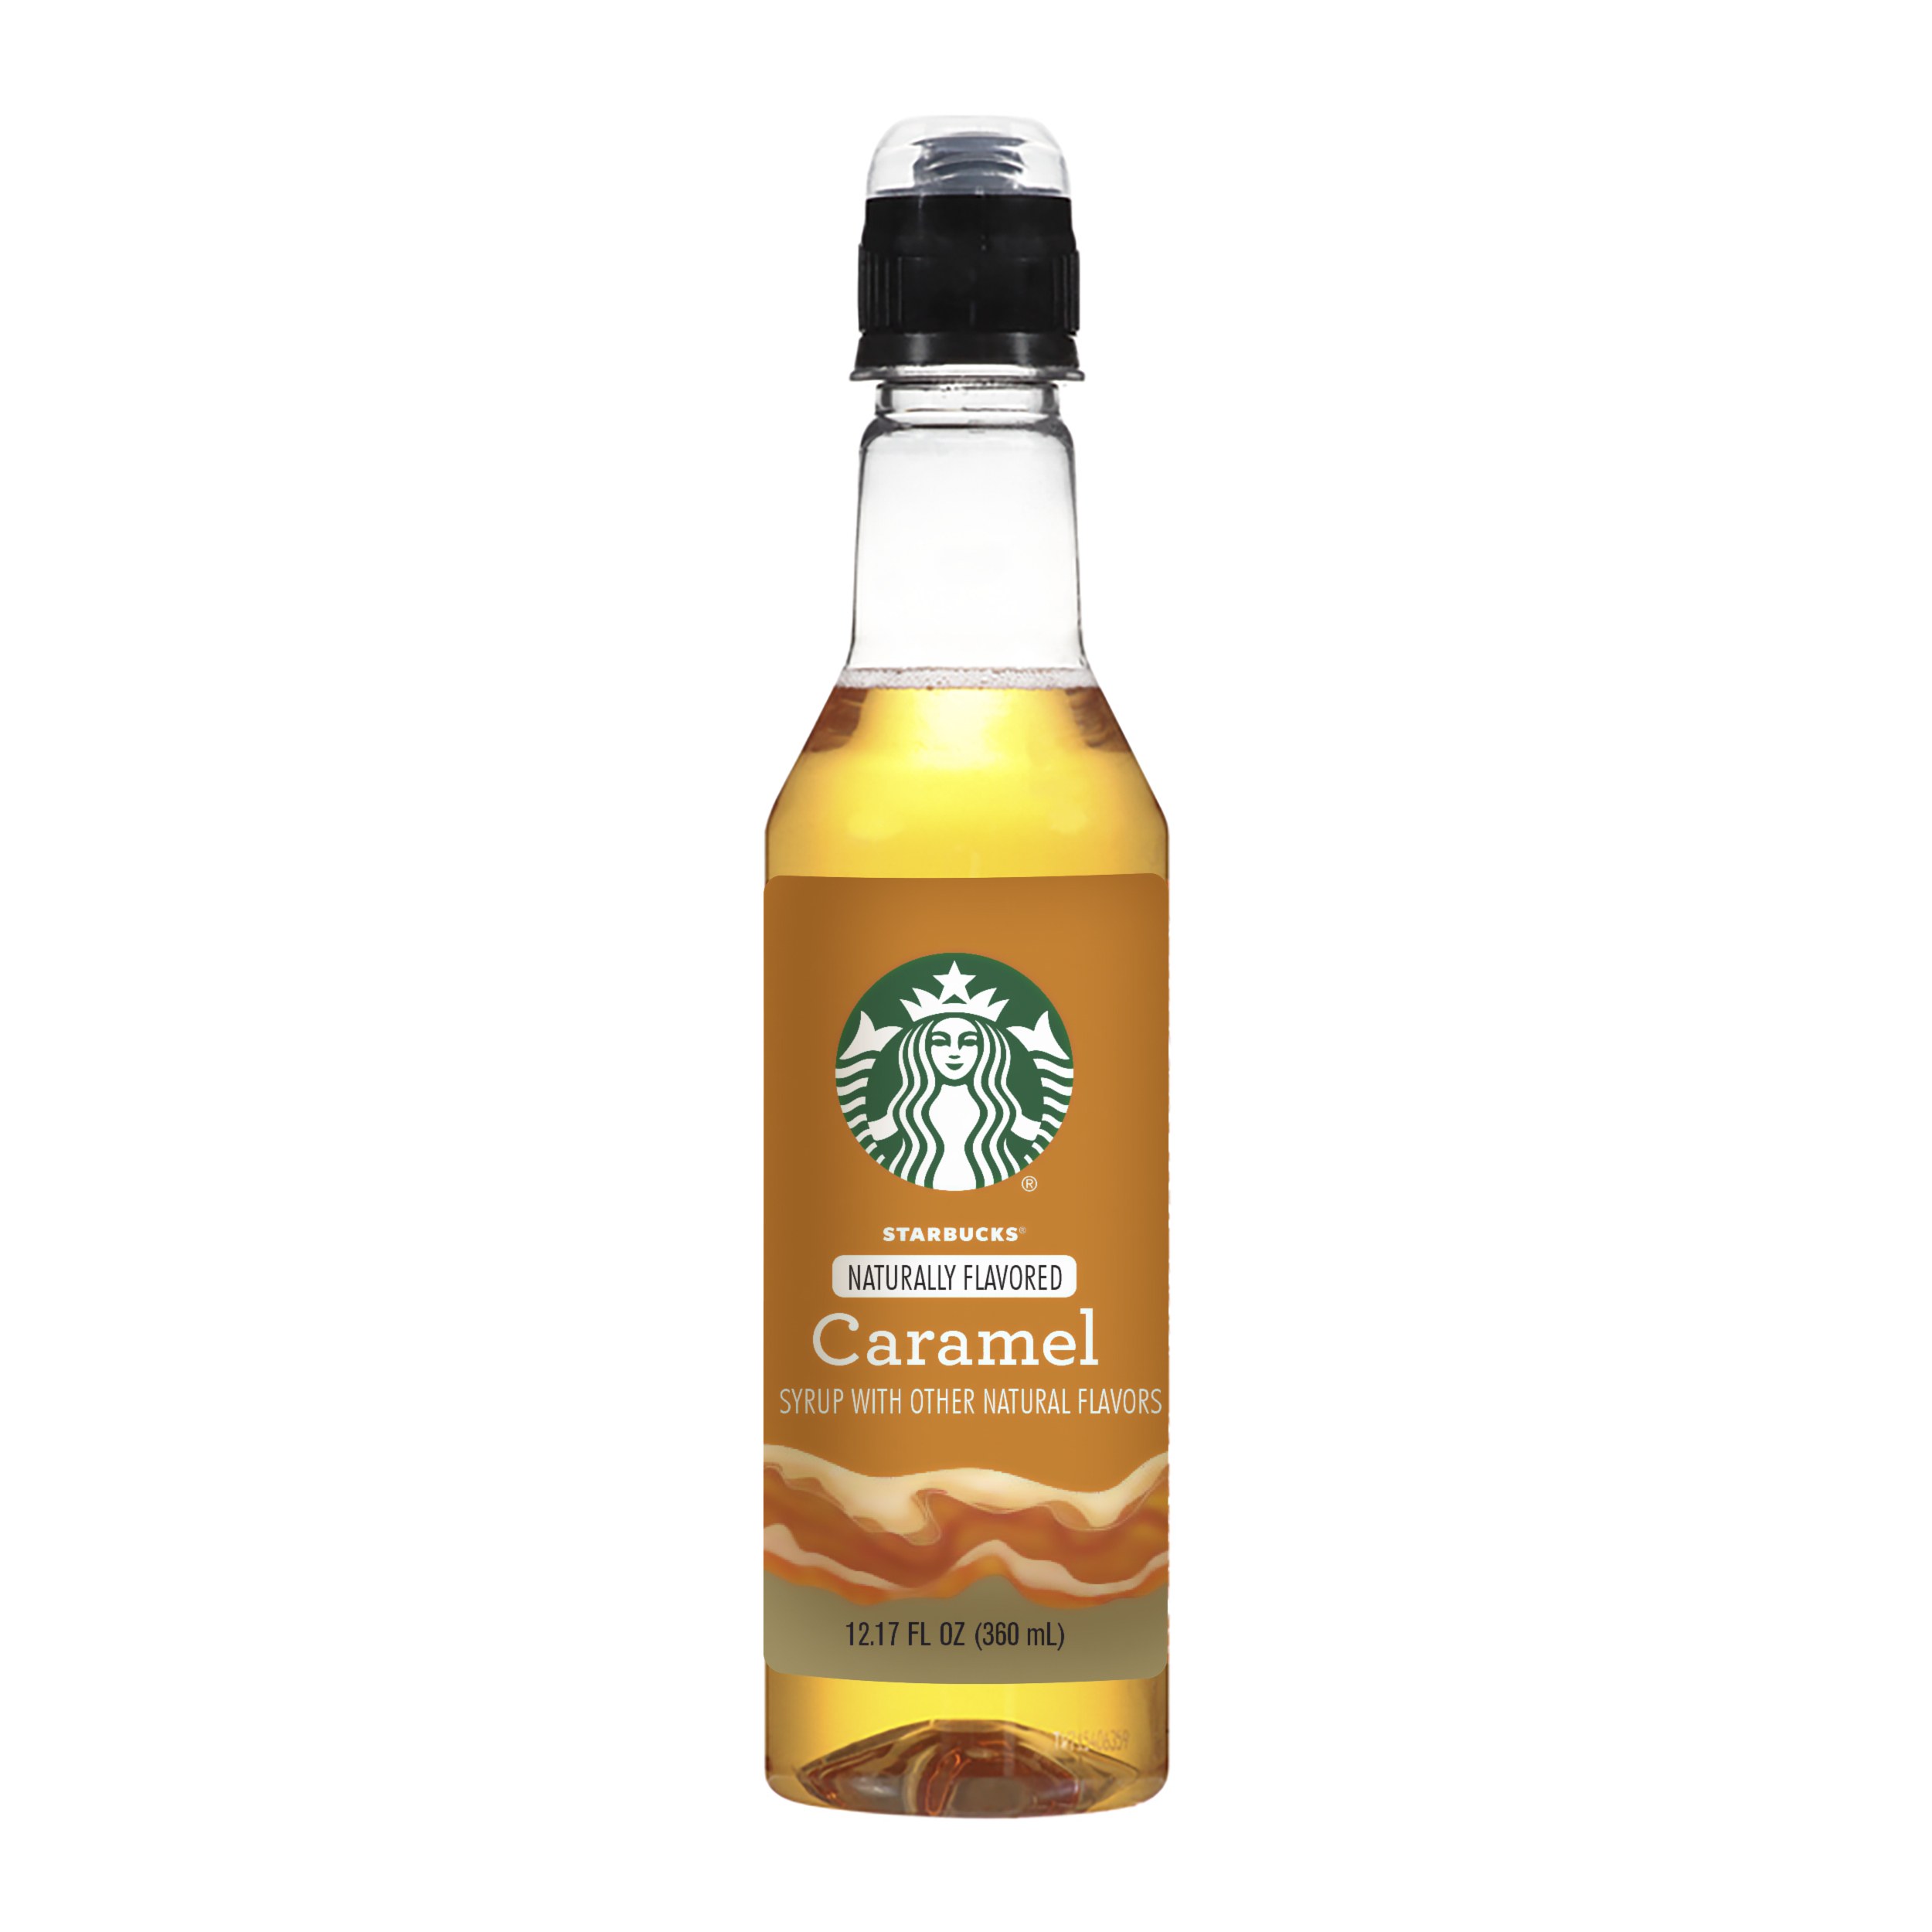 Starbucks Naturally Flavored Caramel Coffee Syrup, 12.7 fl oz - image 1 of 8